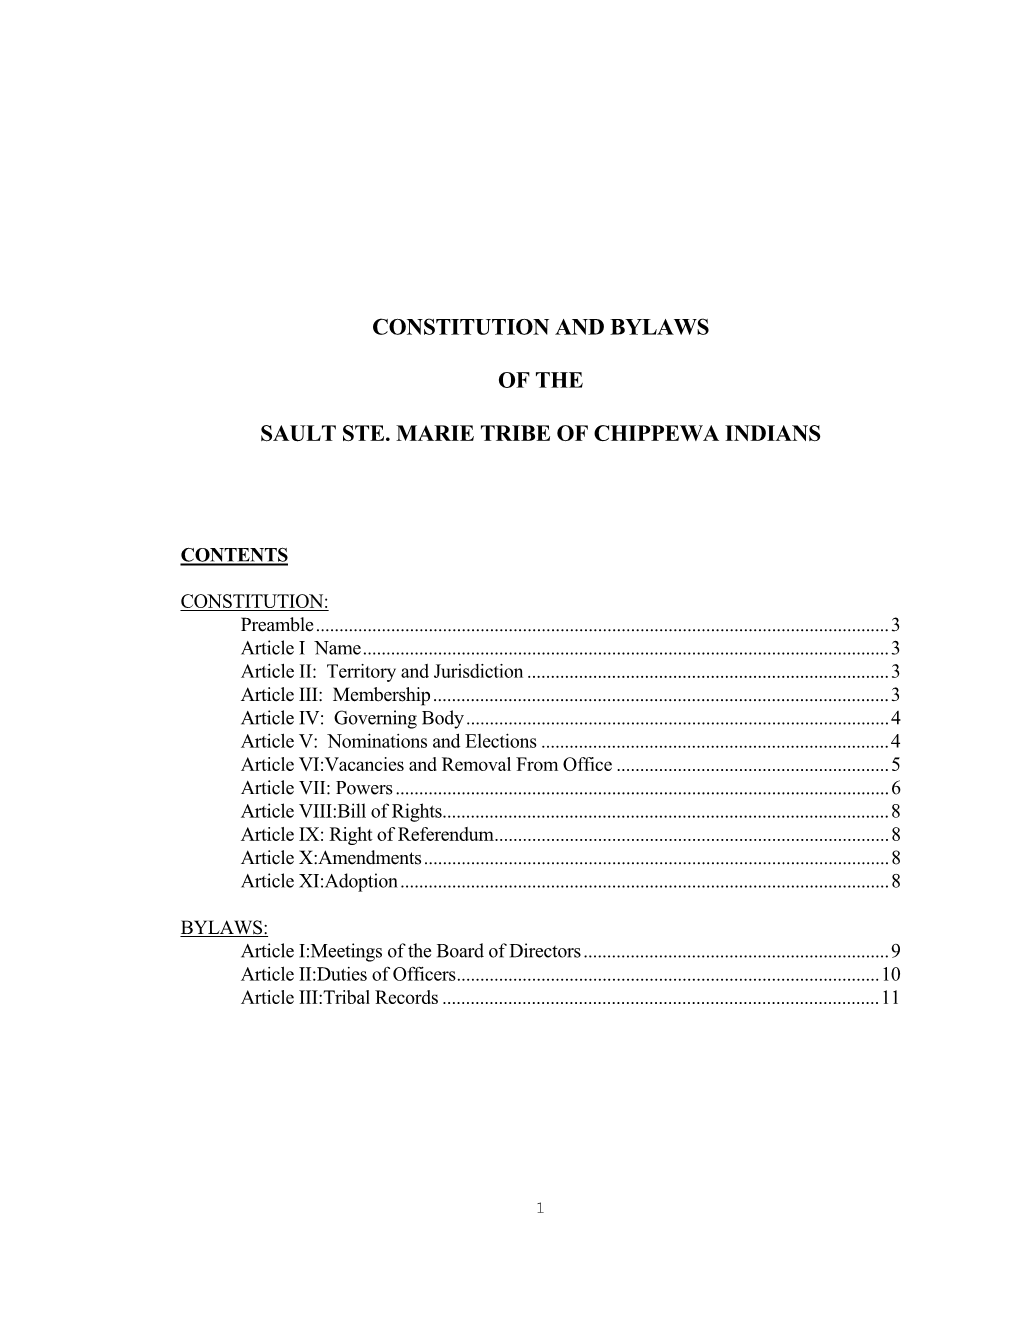 Constitution and Bylaws of the Sault Ste. Marie Tribe Of